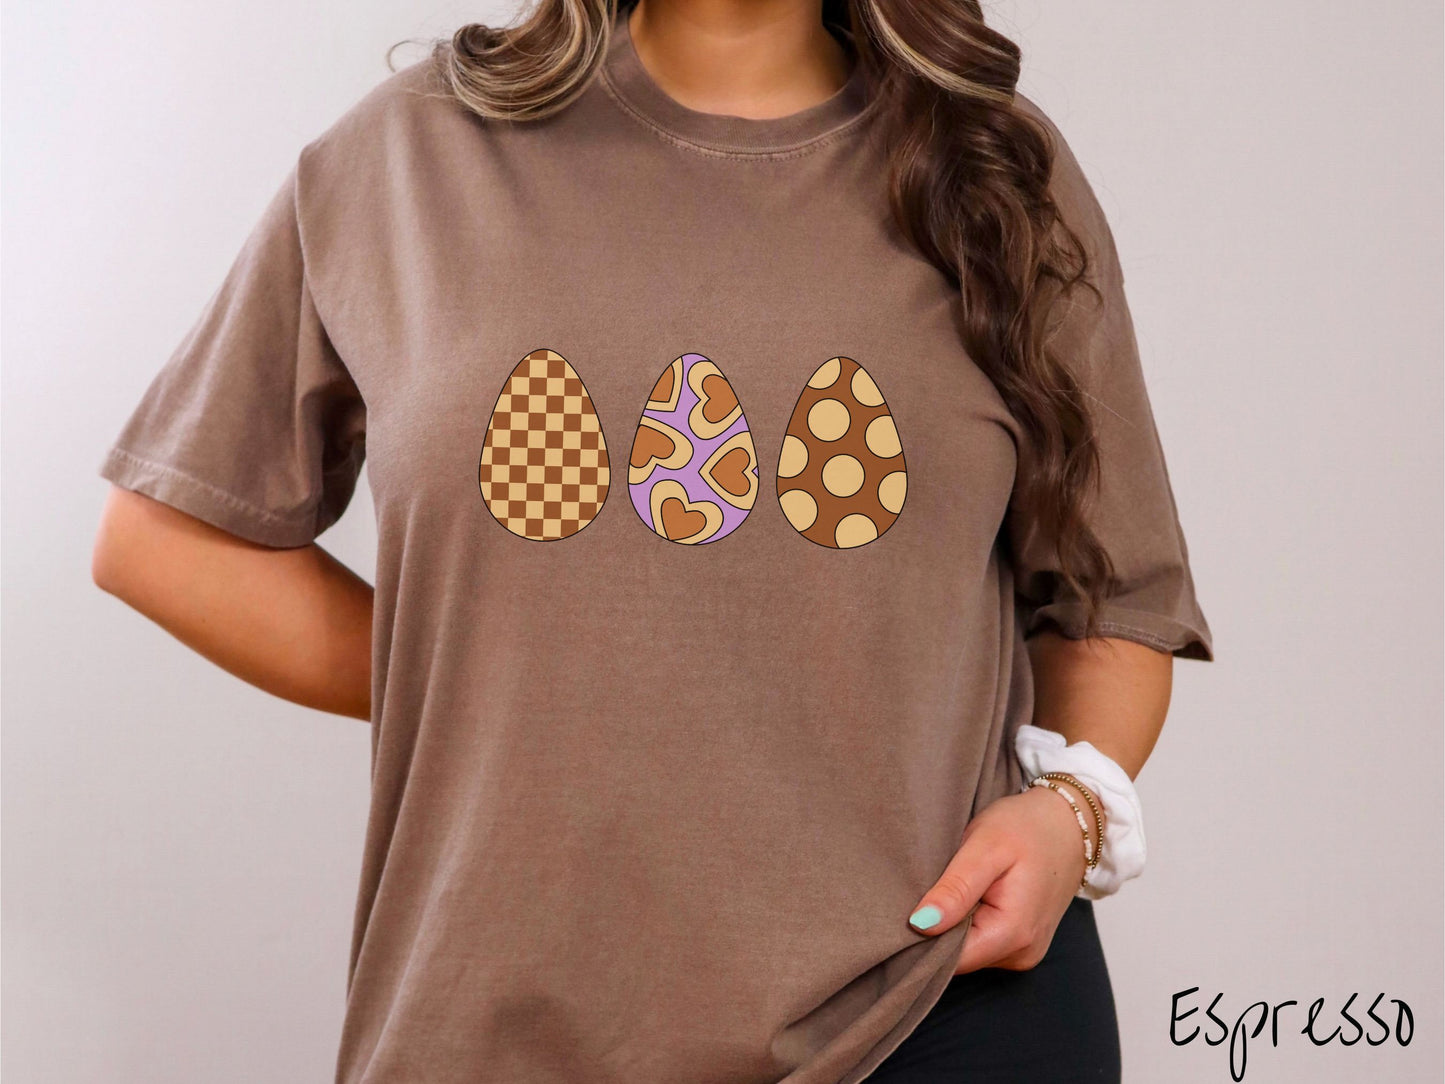 A woman wearing a cute, vintage espresso colored shirt with three Easter eggs. The left egg has a light yellow and brown checkerboard pattern, the middle is purple with light yellow brown hearts, and the right is brown with light yellow circles.